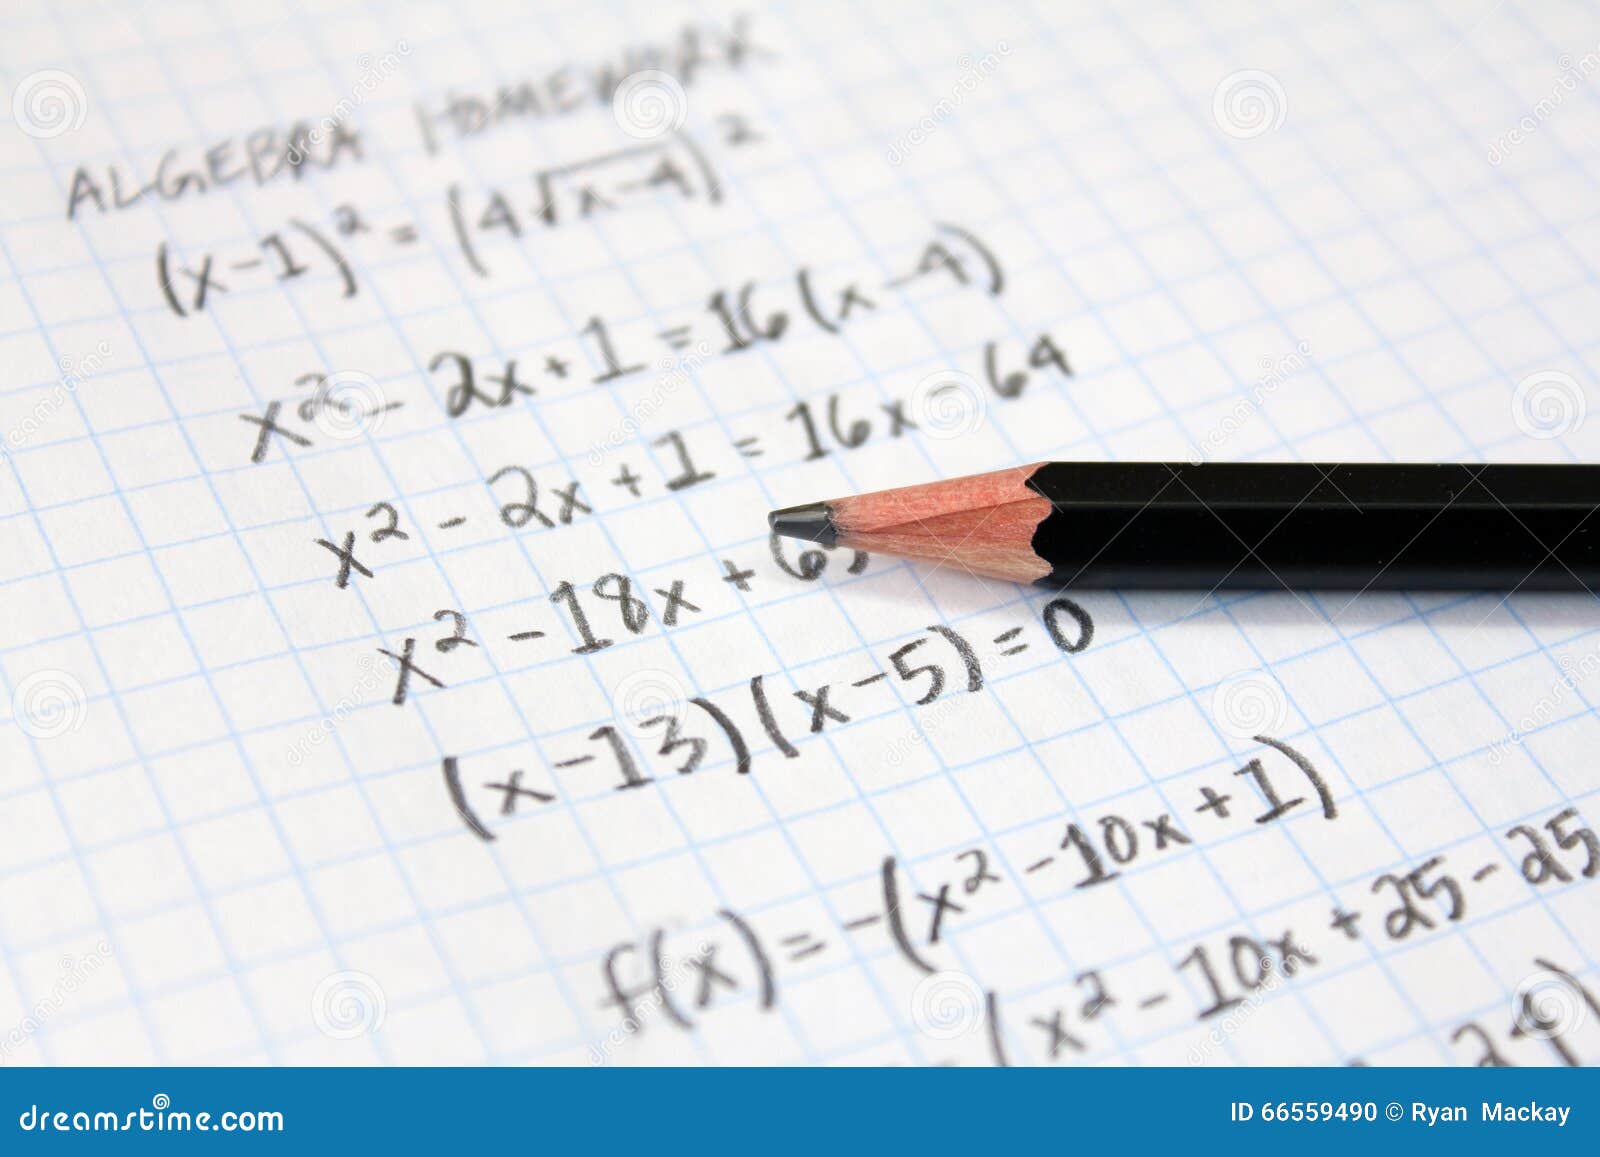 Math Problems stock photo. Image of graph, problems, science - 66559490